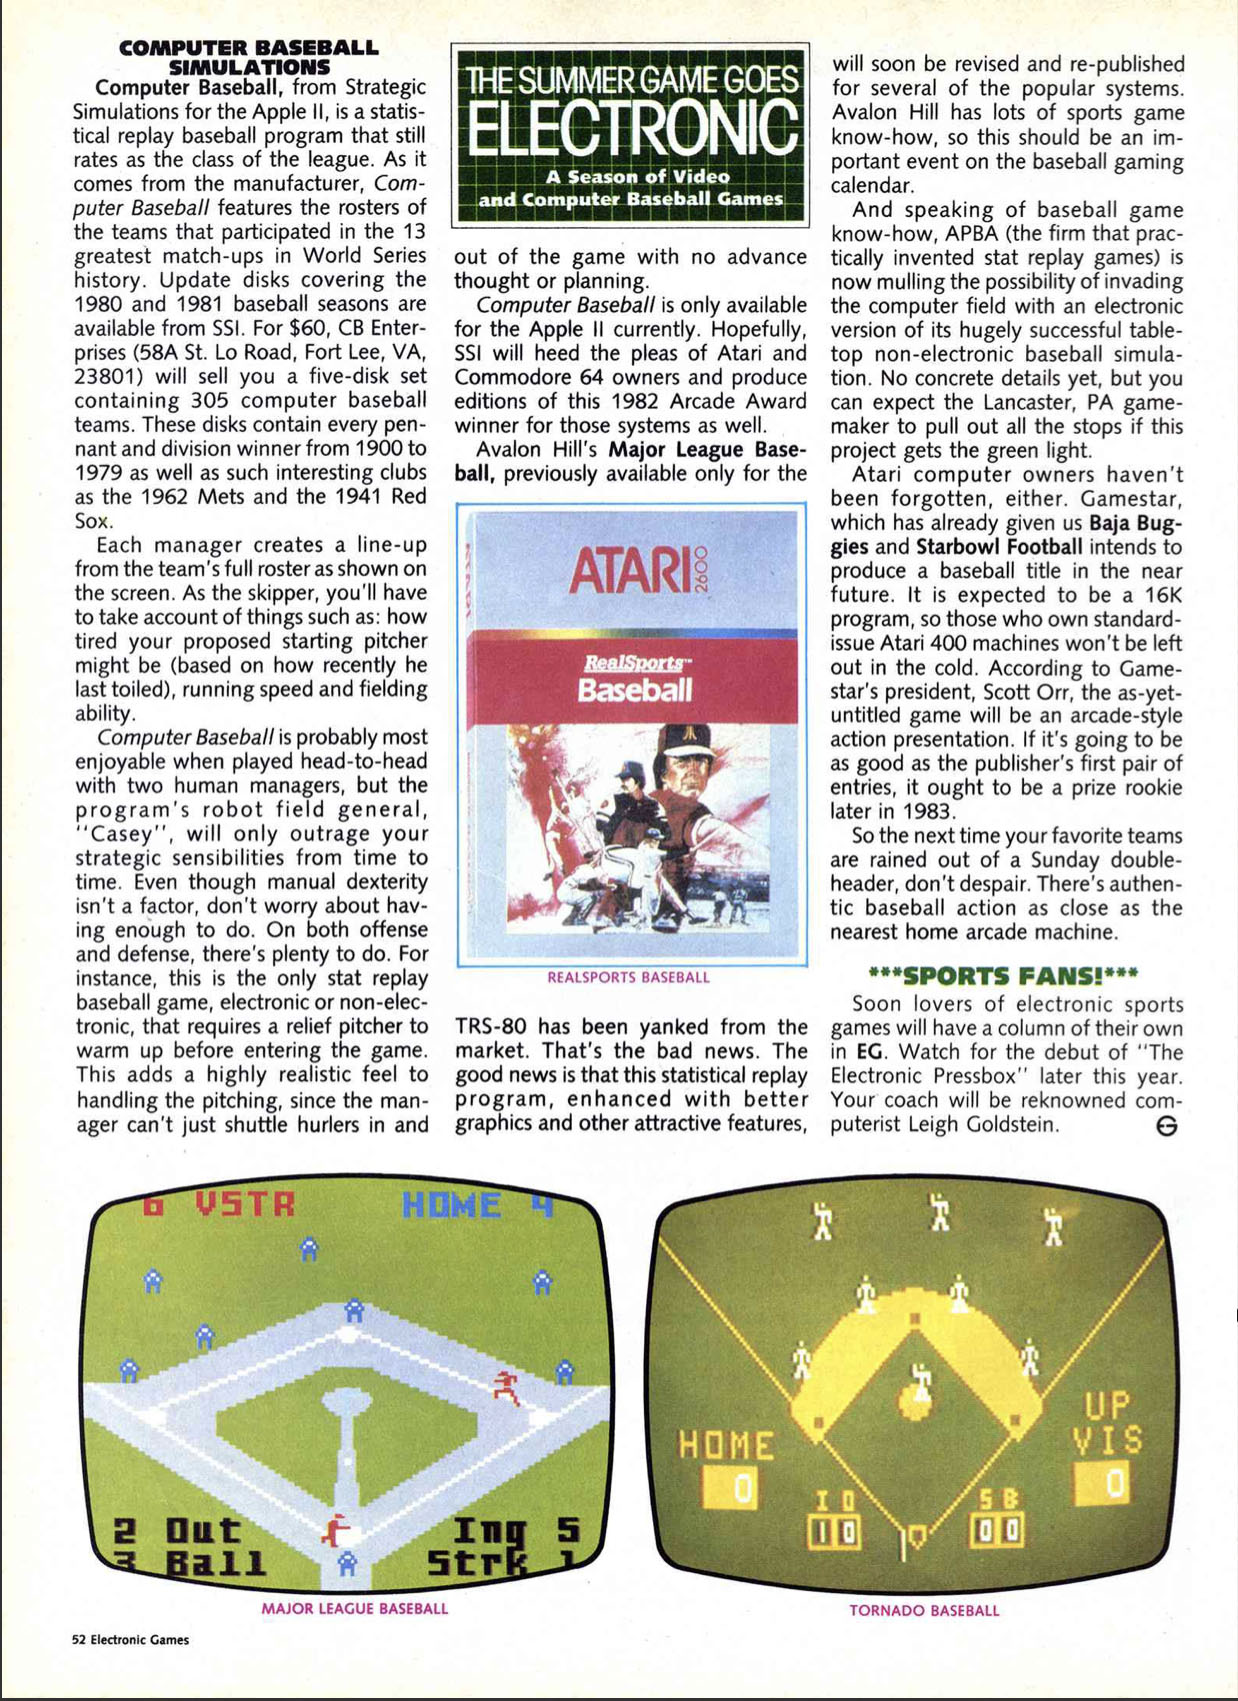 The Summer Game Goes Electronic, Electronic Games August 1983 page 52